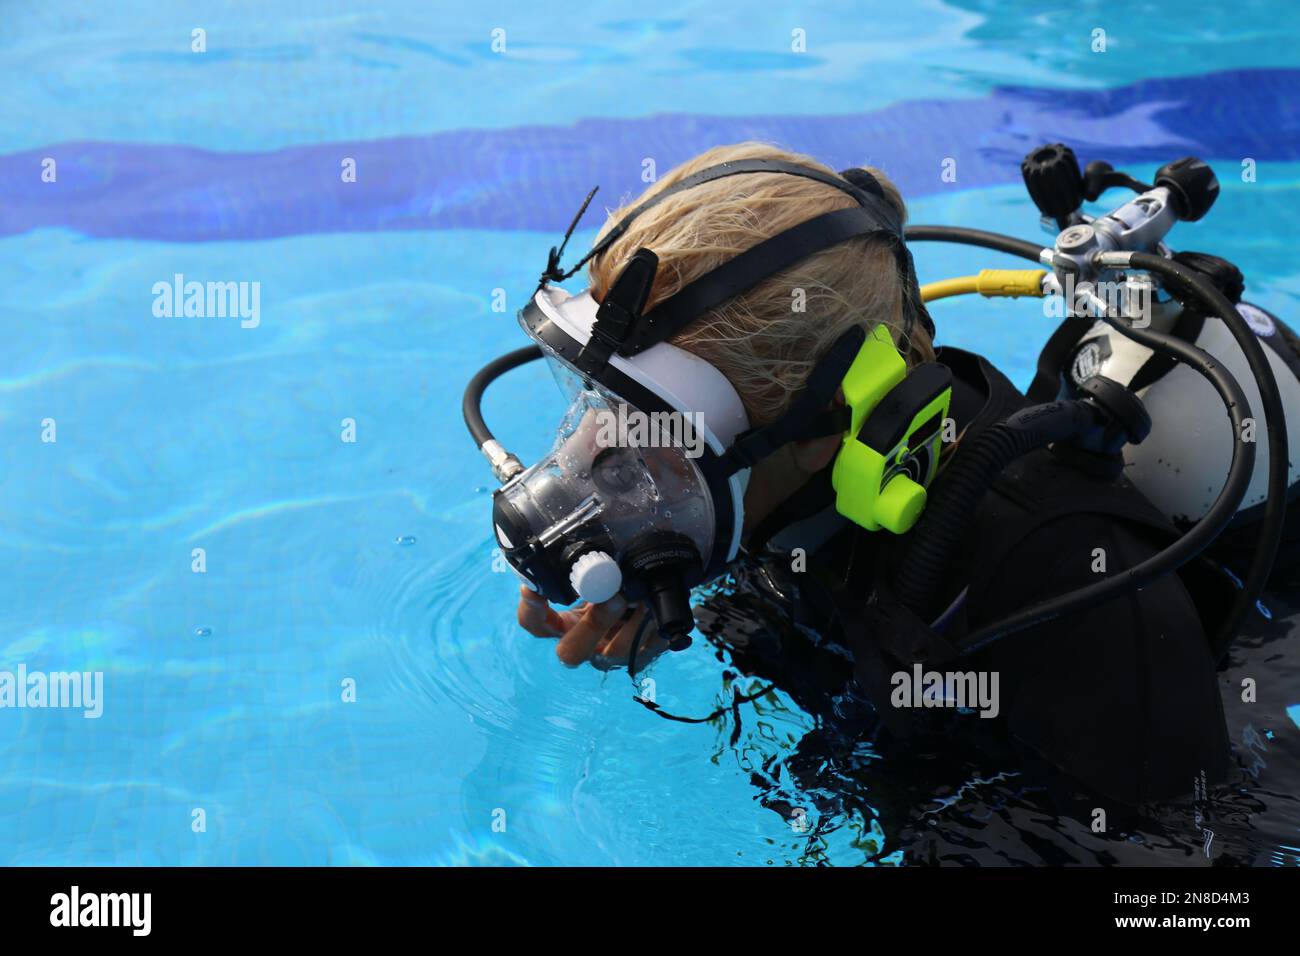 May 24, 2017 - Tuscany, Italy: A woman wear a full face diving mask with ear comm ready for the training in the pool. Full Face diving mask training Stock Photo